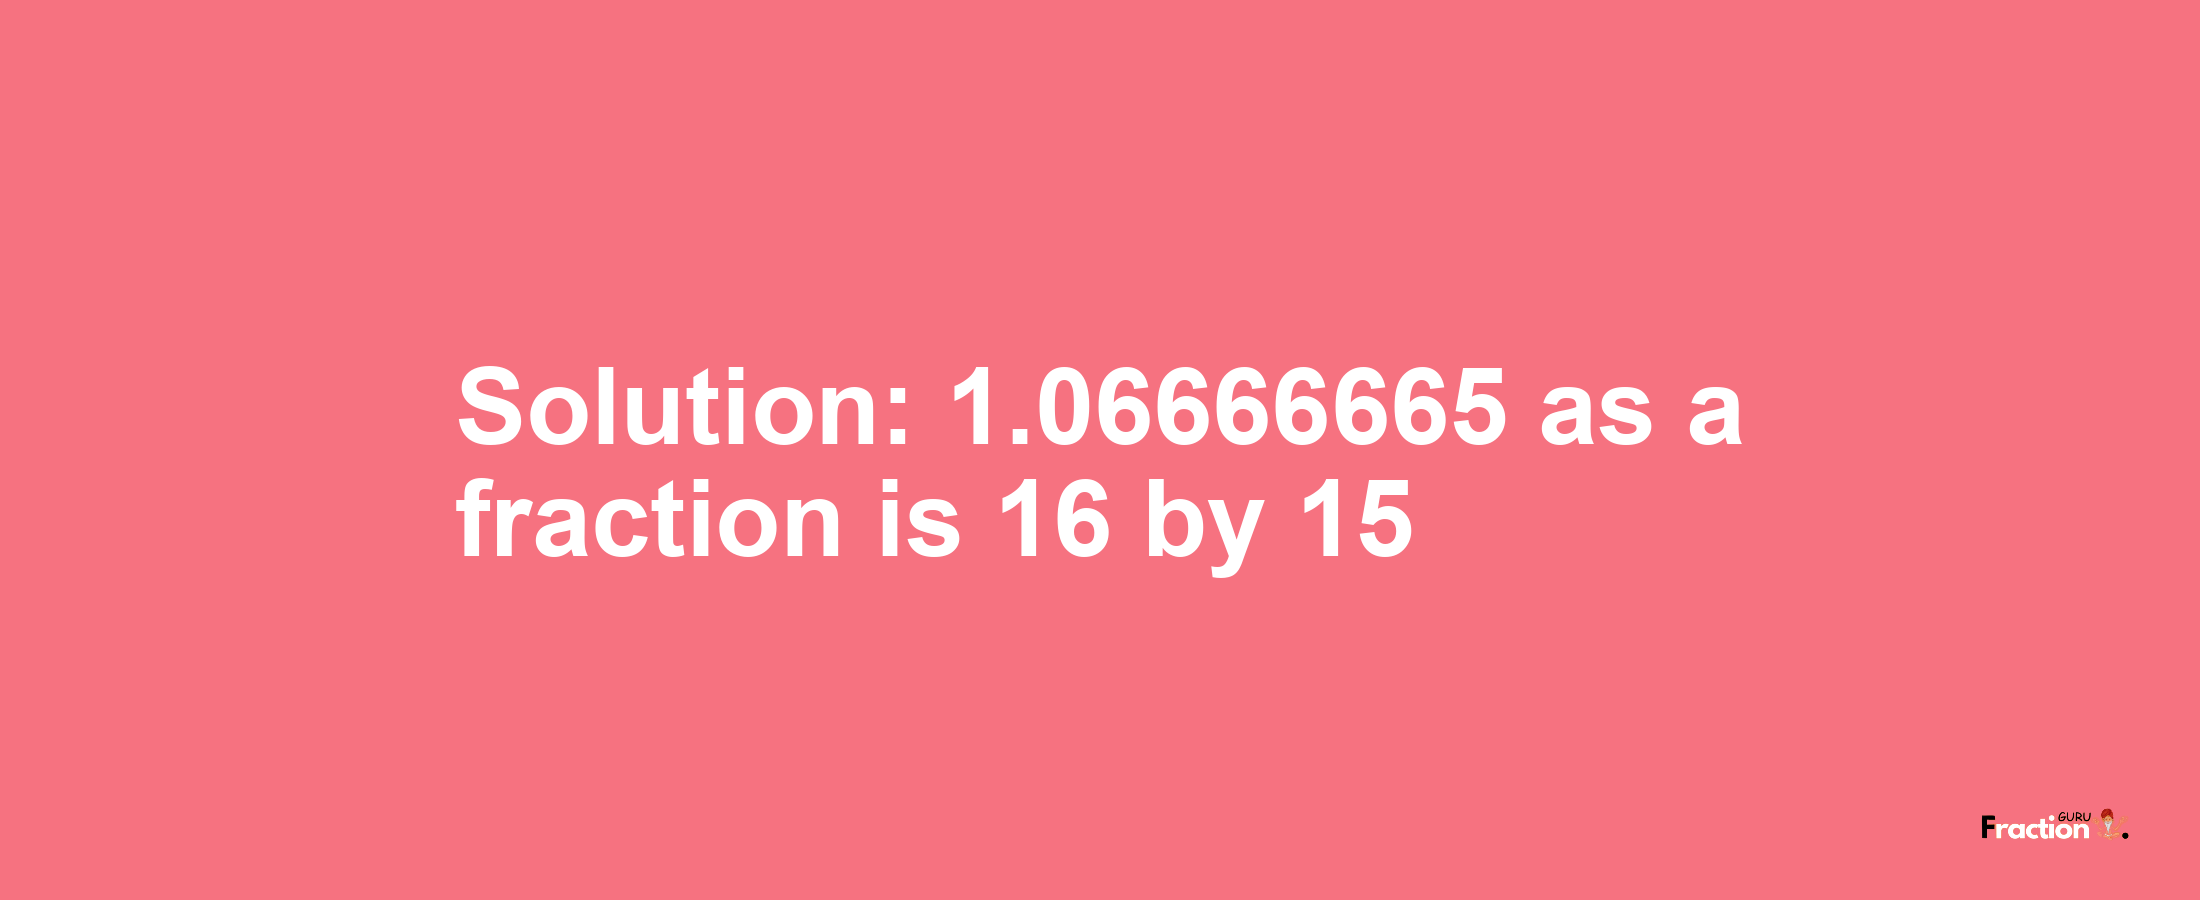 Solution:1.06666665 as a fraction is 16/15